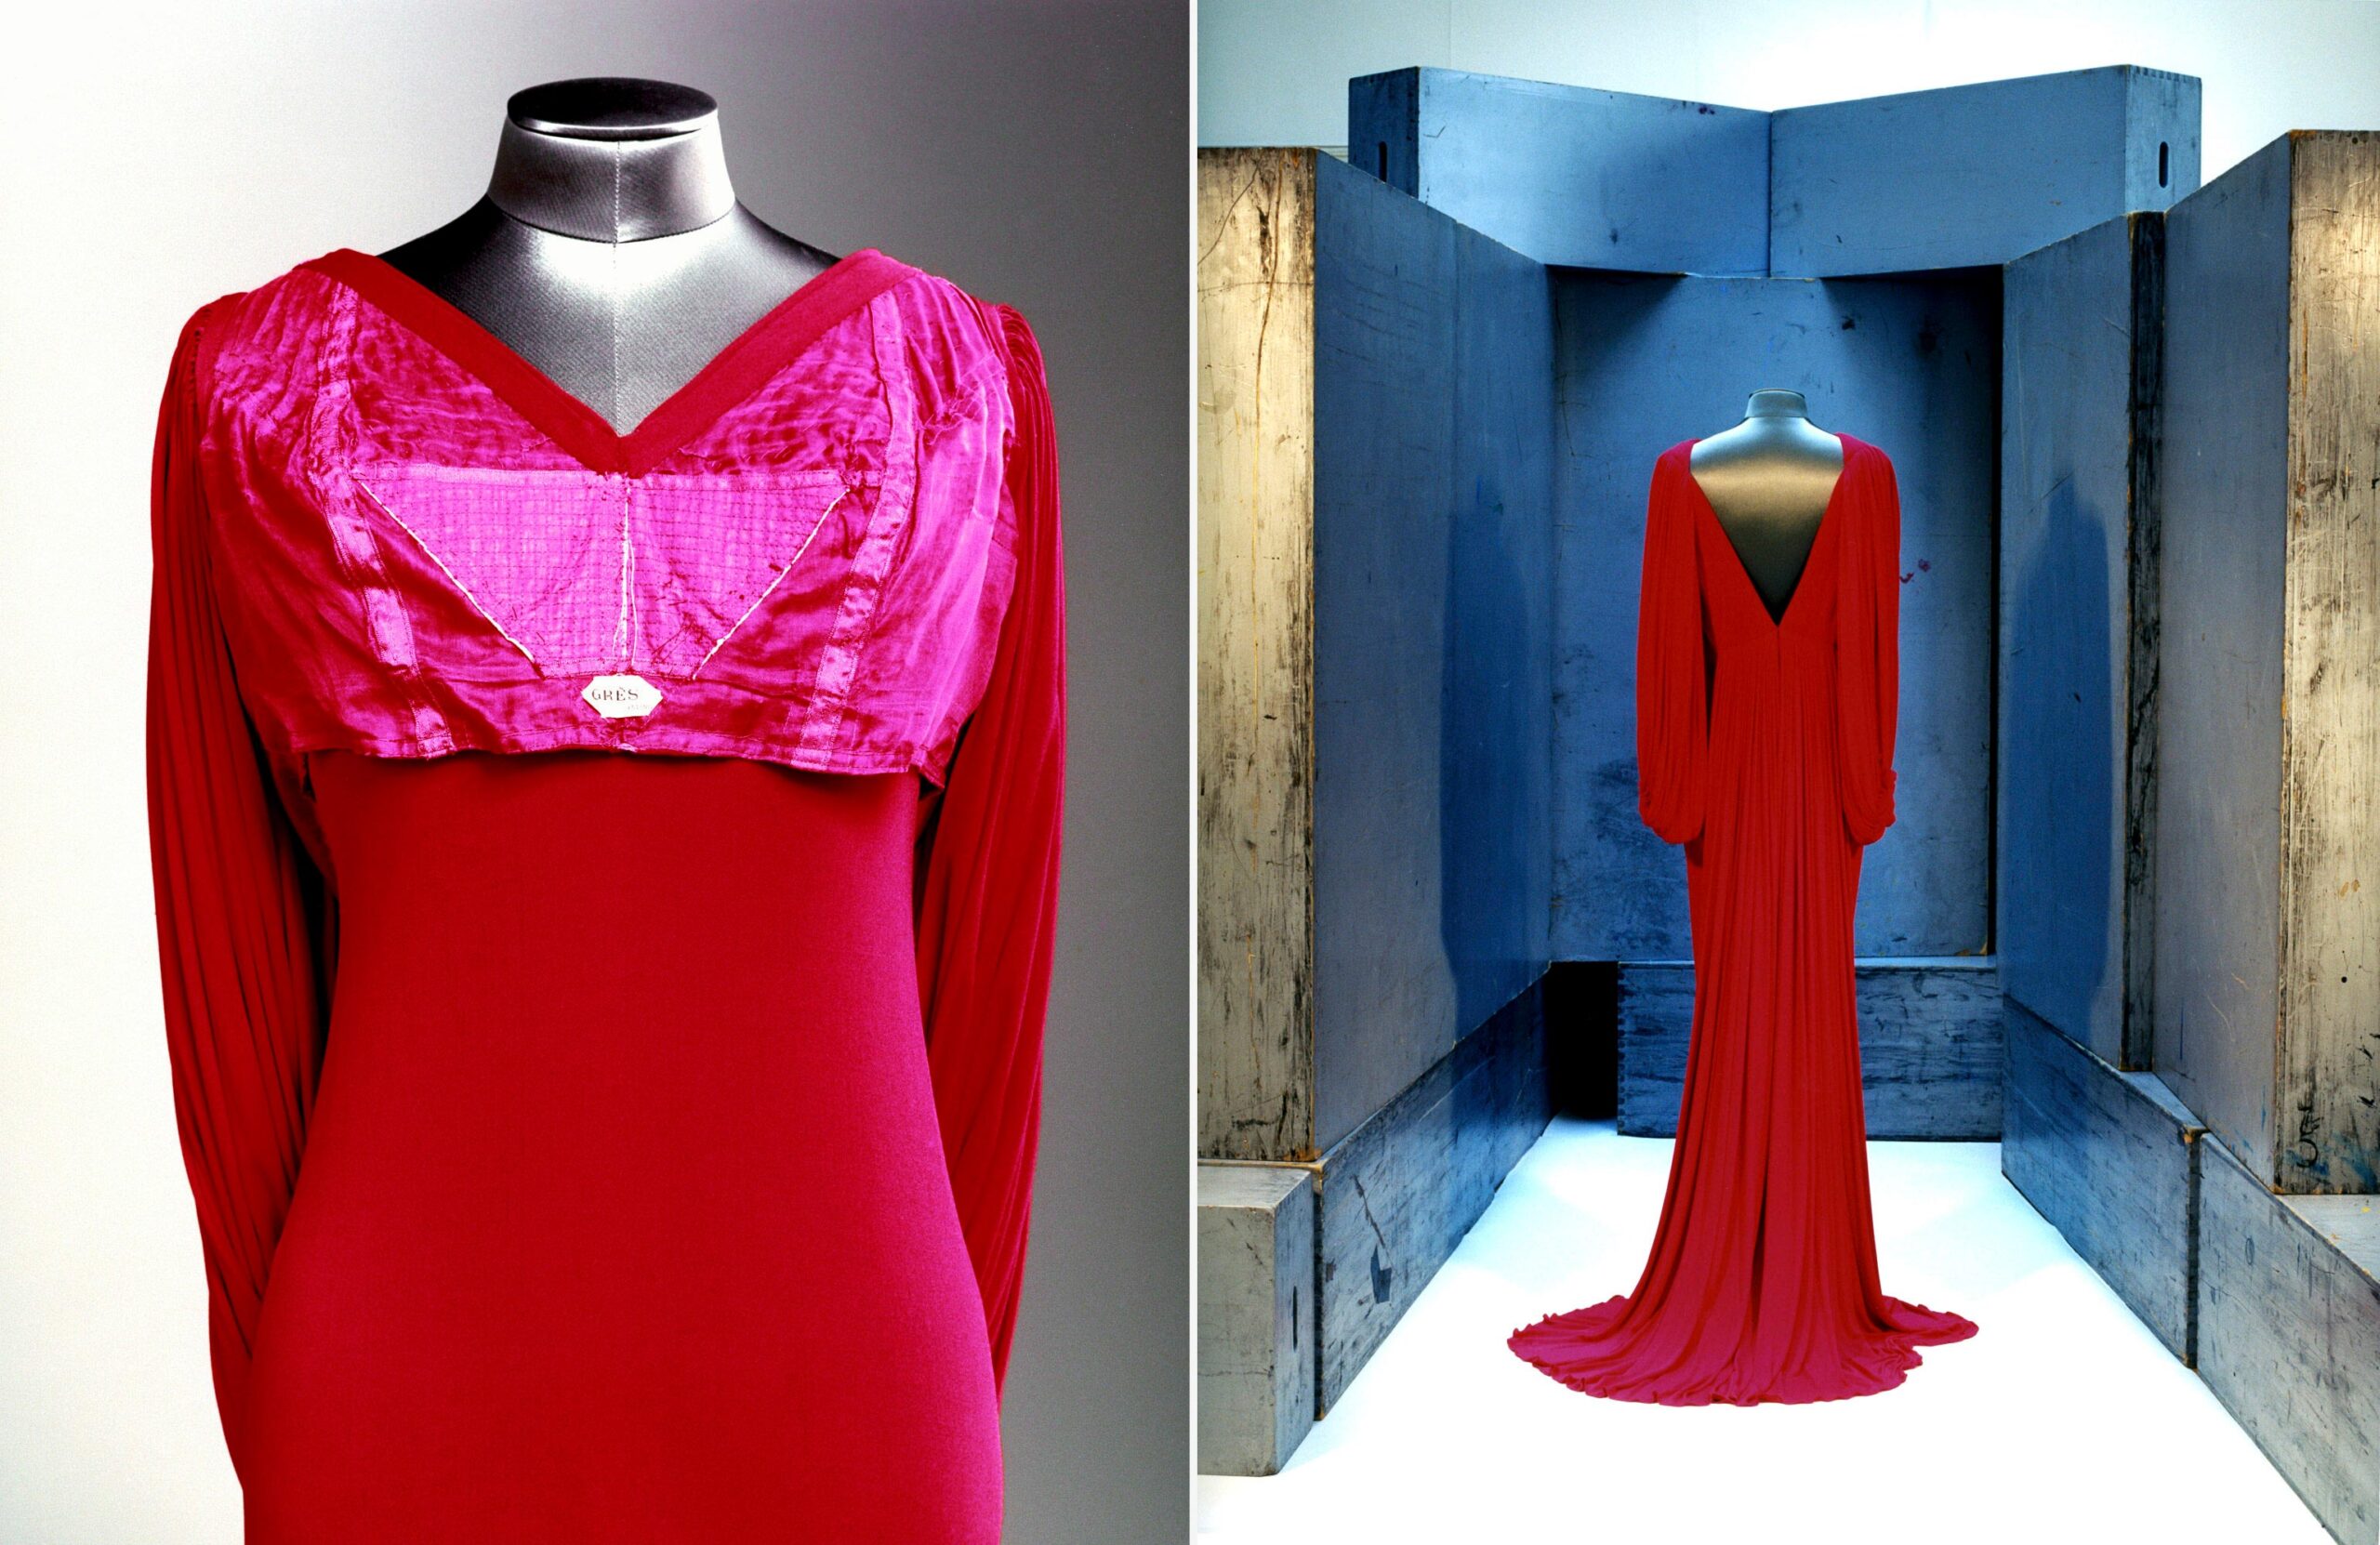 MADAME GRÈS, COSTUME AND FASHION COLLECTION, UNIVERSITY OF APPLIED ARTS VIENNA